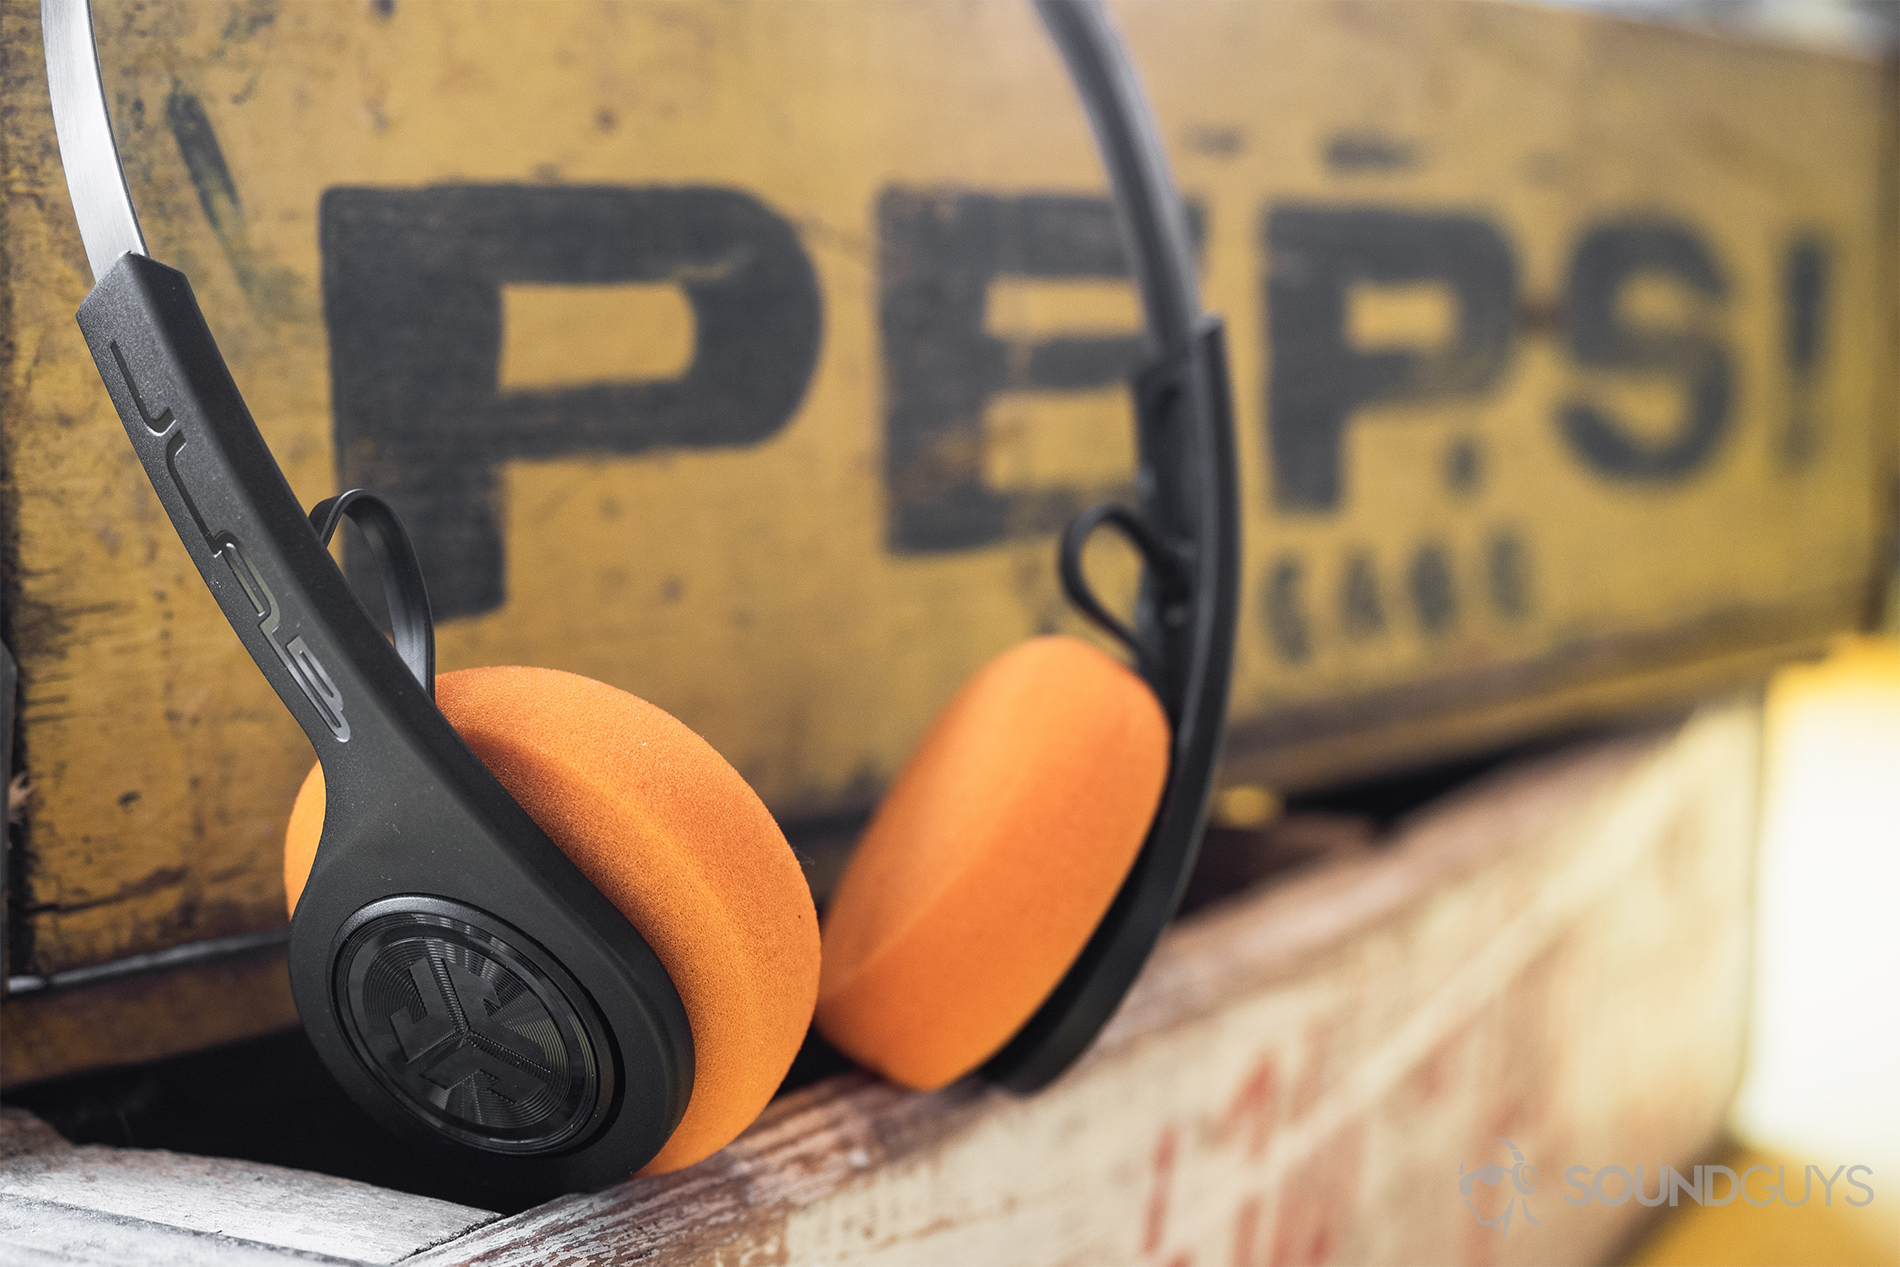 JLab Rewind Wireless Retro: The headphones propped on a wooden box and against another labeled "Pepsi."